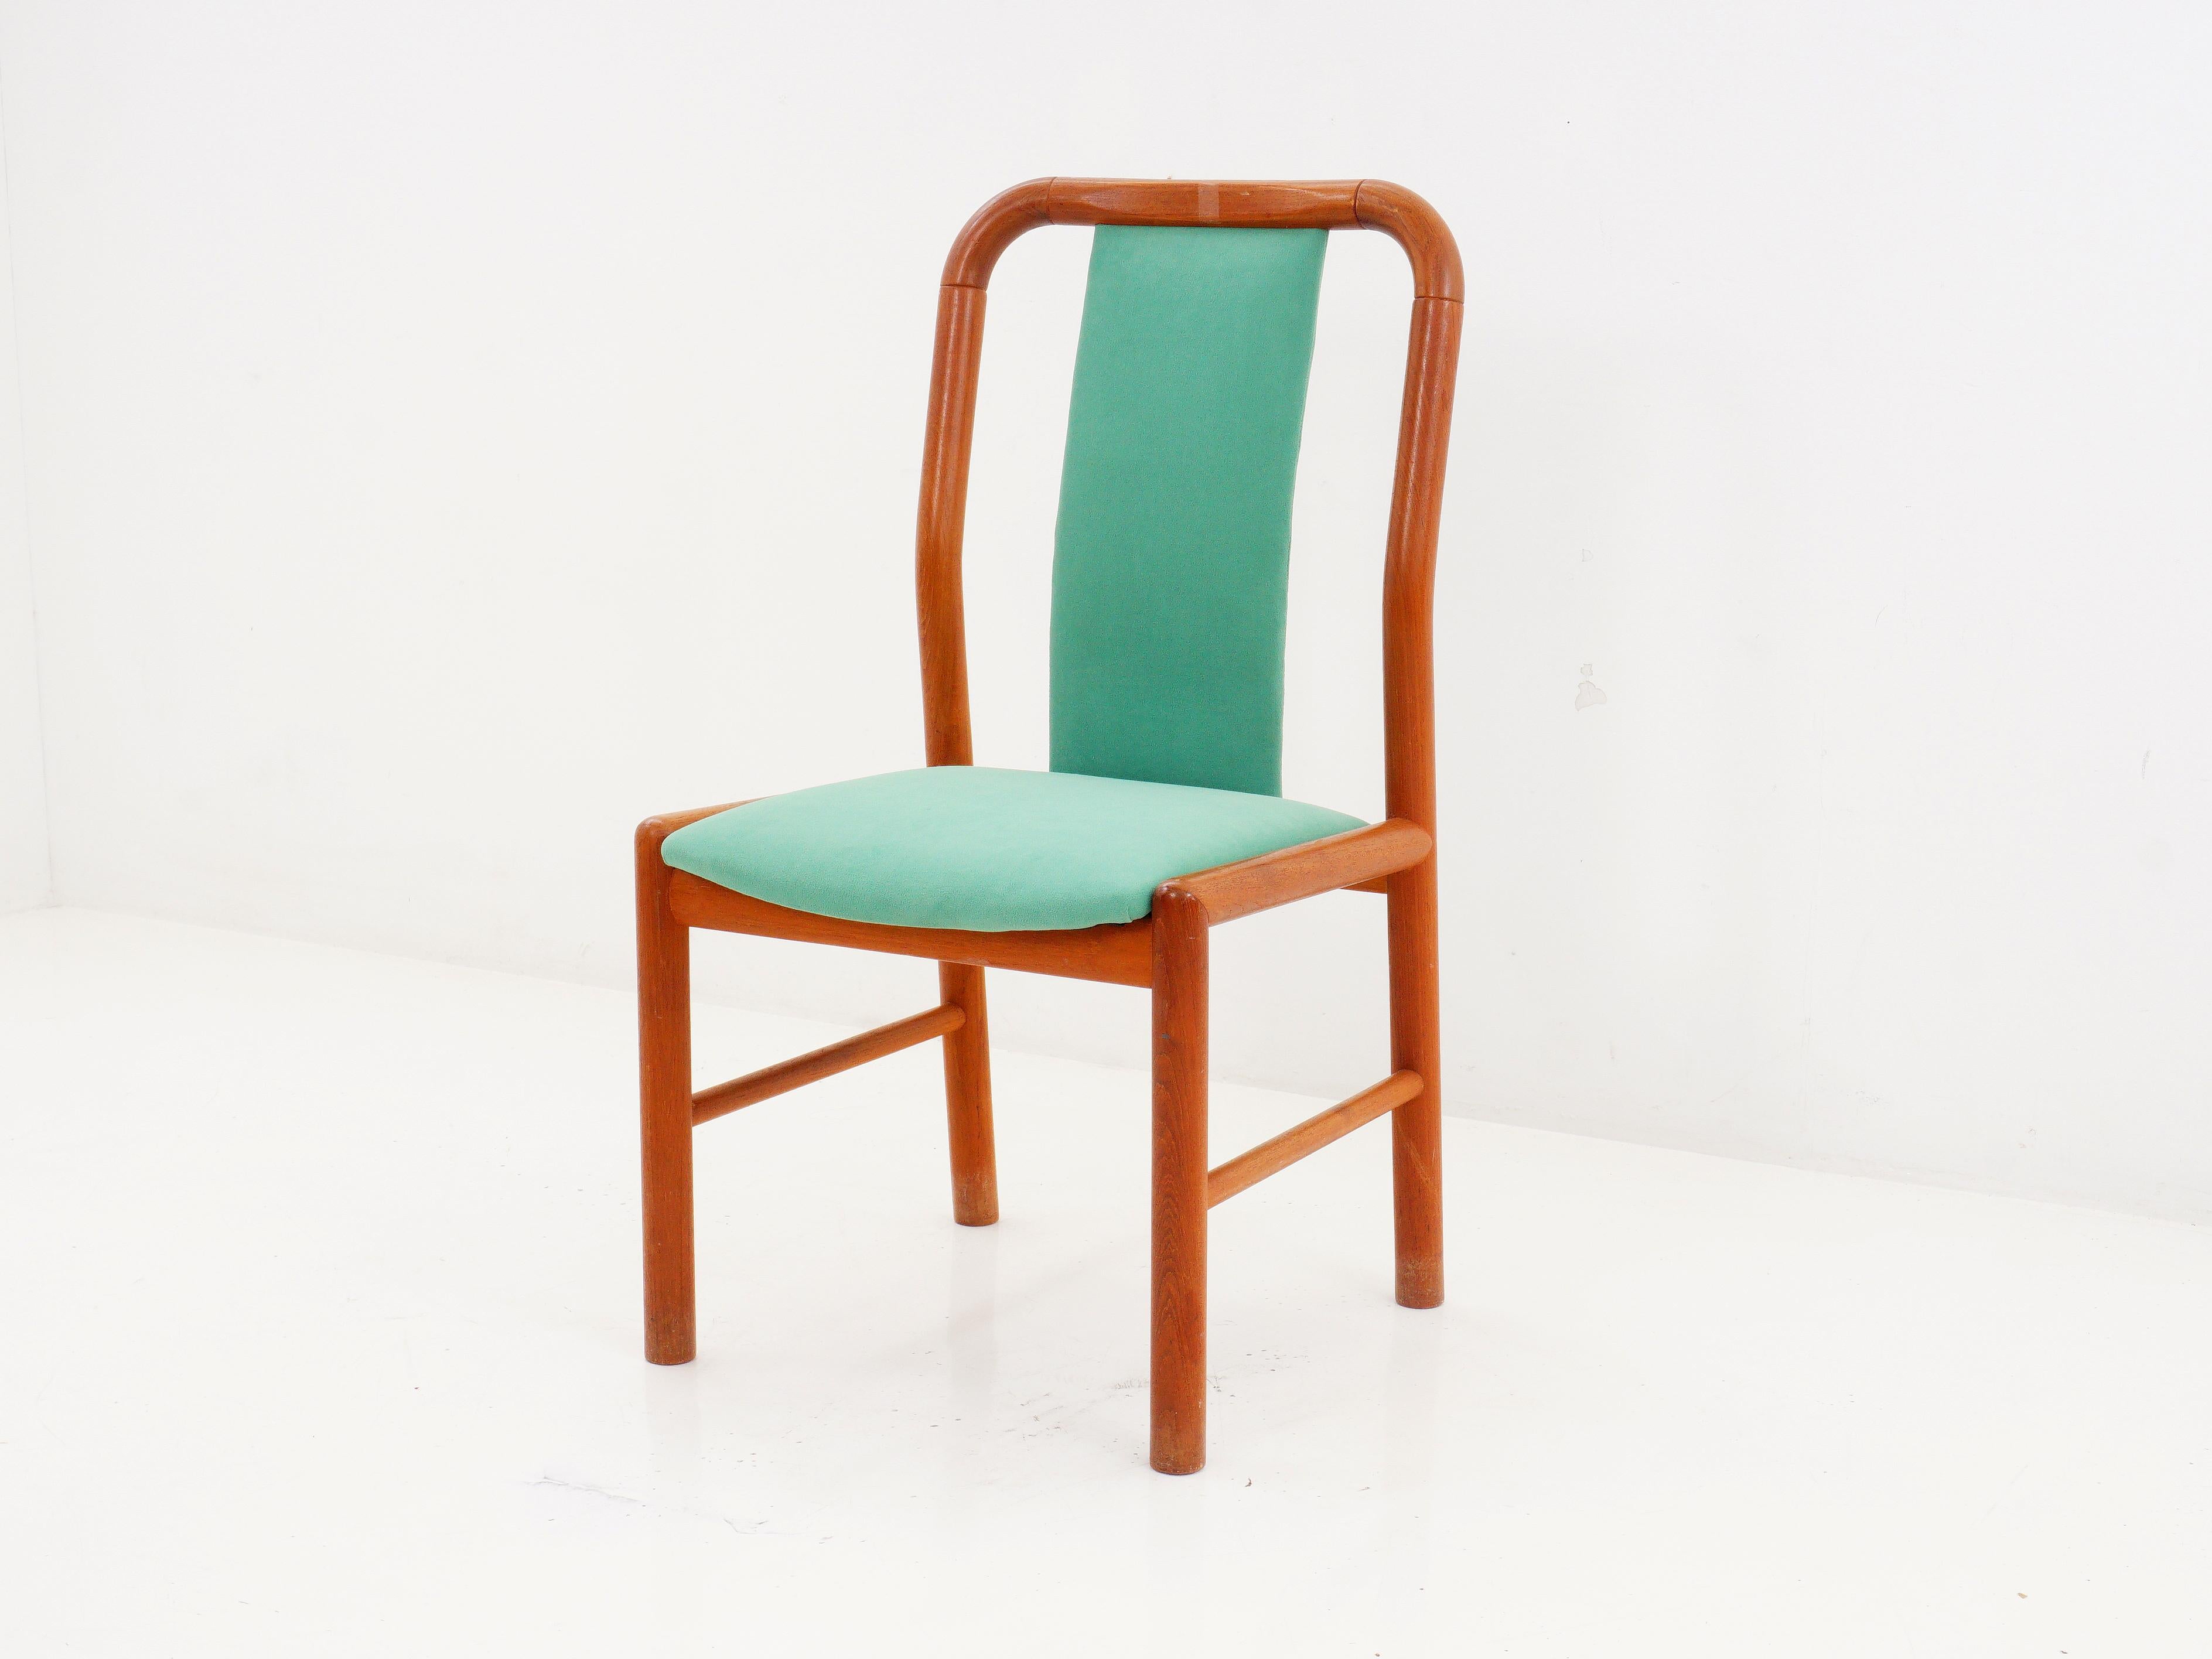 Add some “greenery” to your dining area with these freshly reupholstered Mid-Century Modern Danish dining chairs. Feel like you're frolicking through endless tulip fields with this Benny A. Linden inspired Mid-Century Modern teak chair design.

-